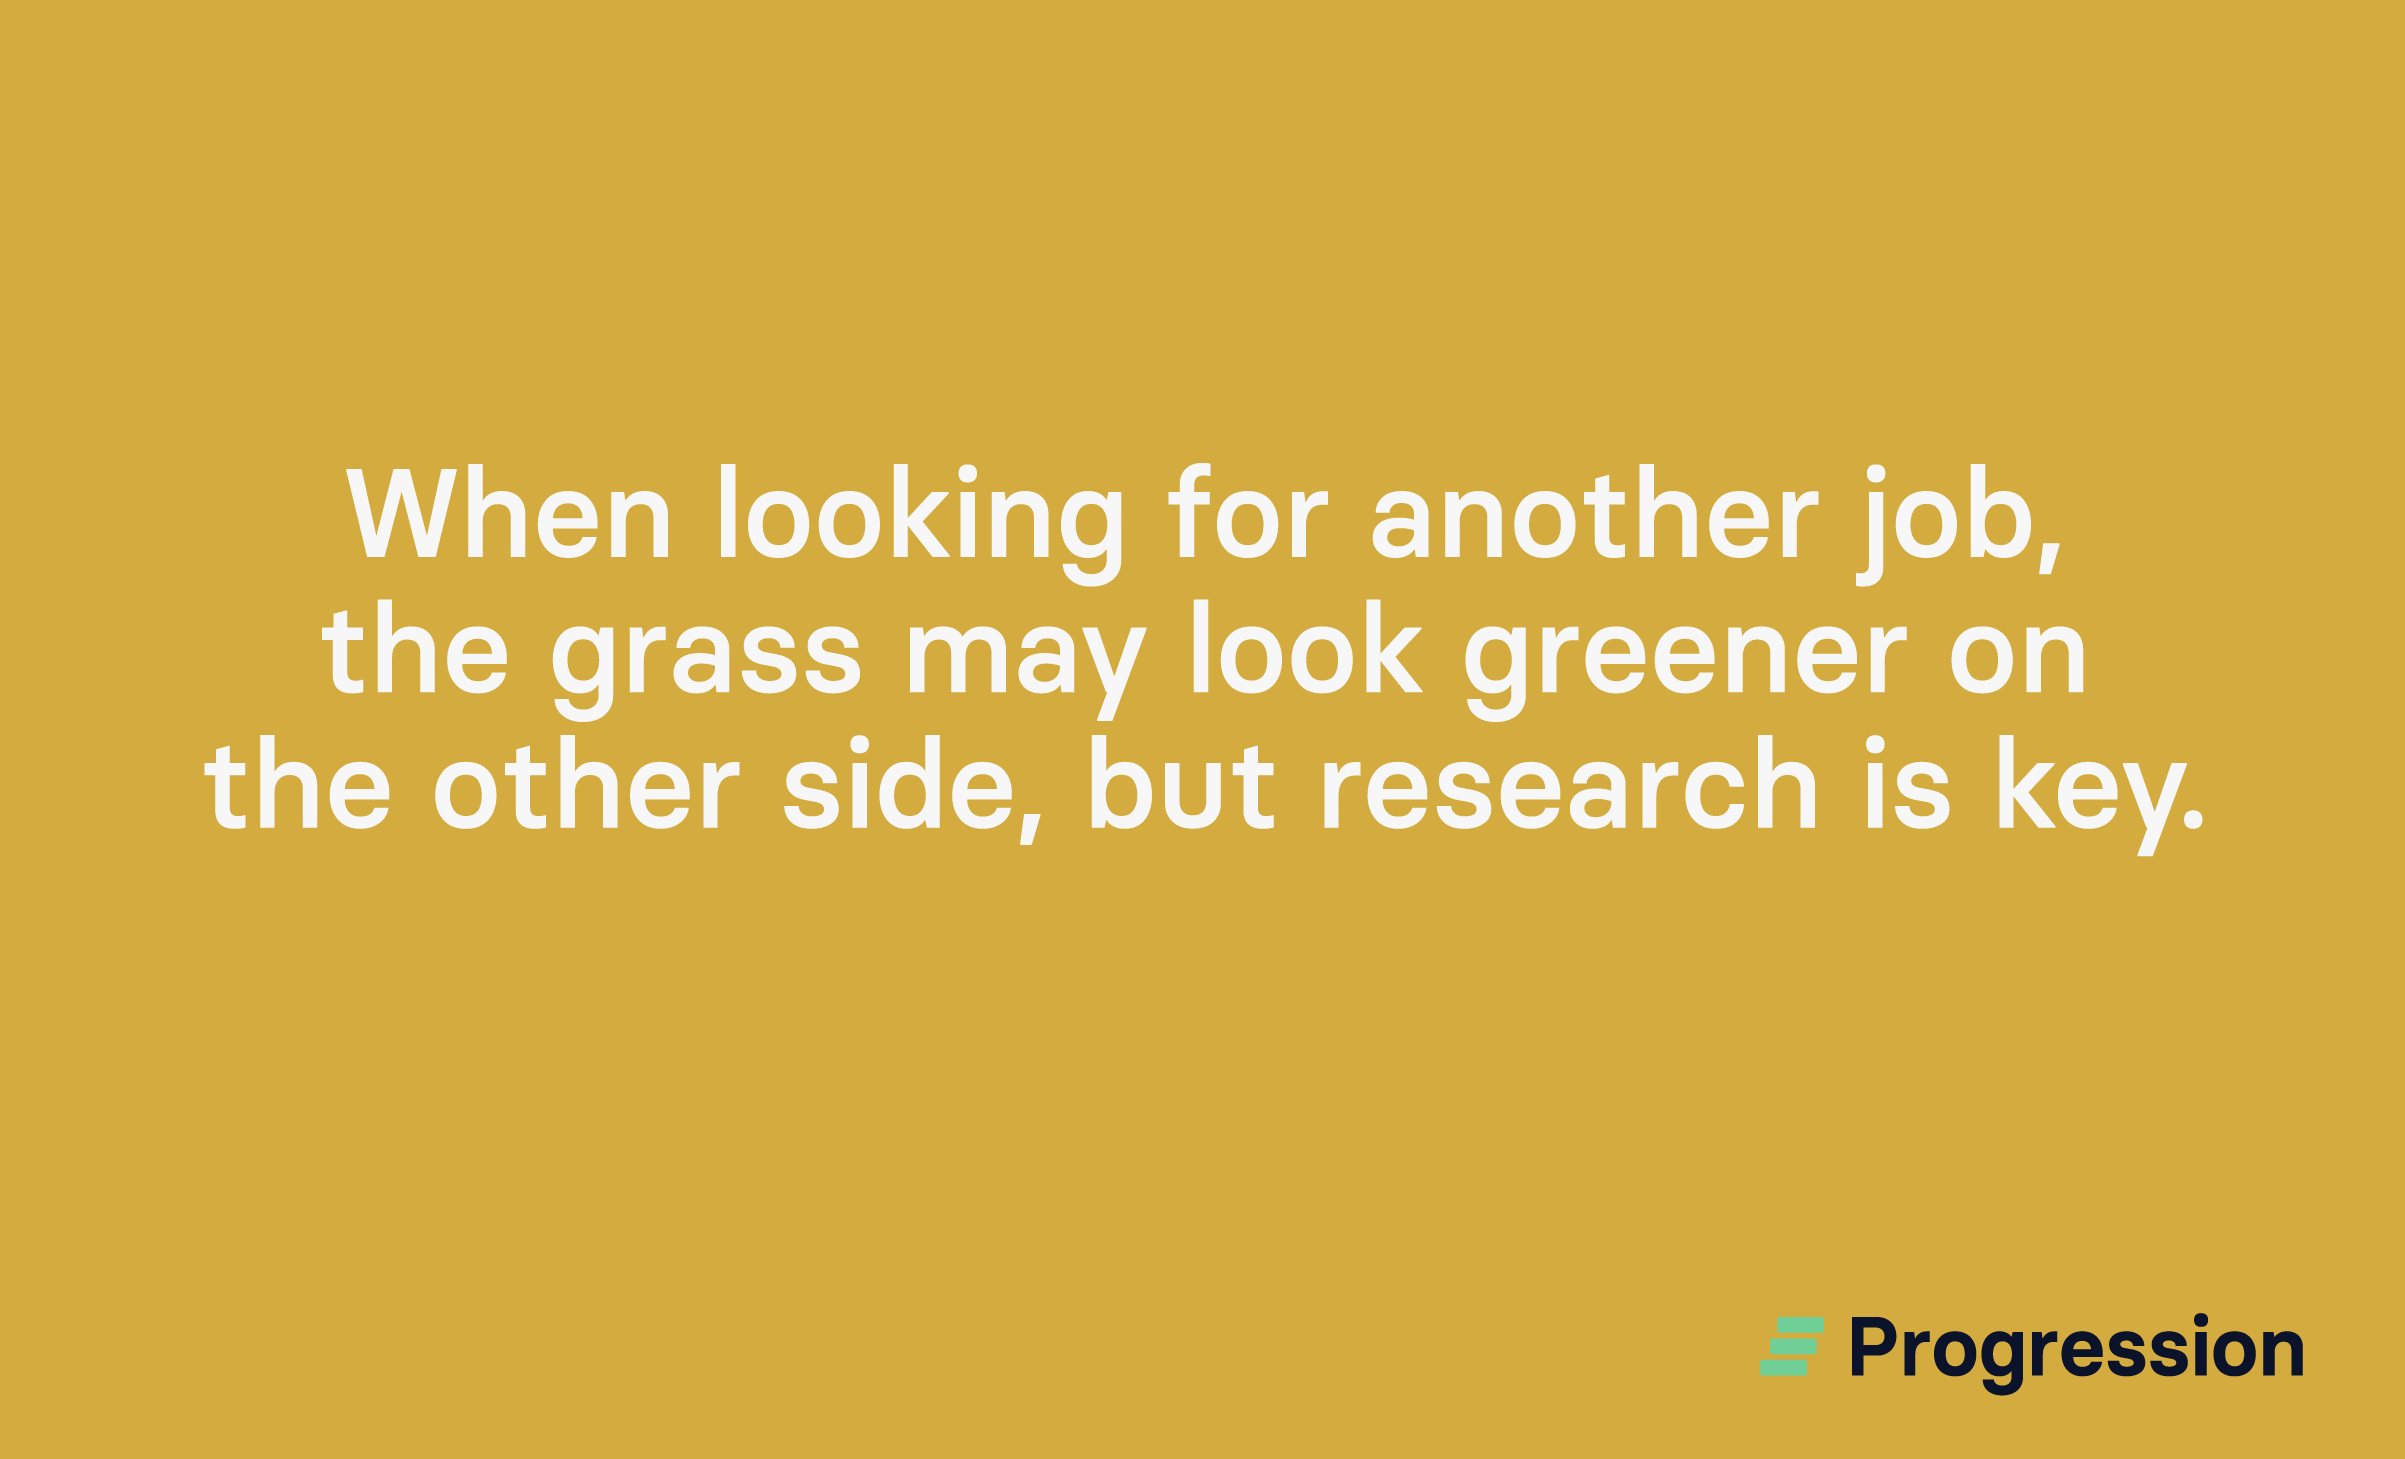 Graphic highlighting how research is key when looking for another job.